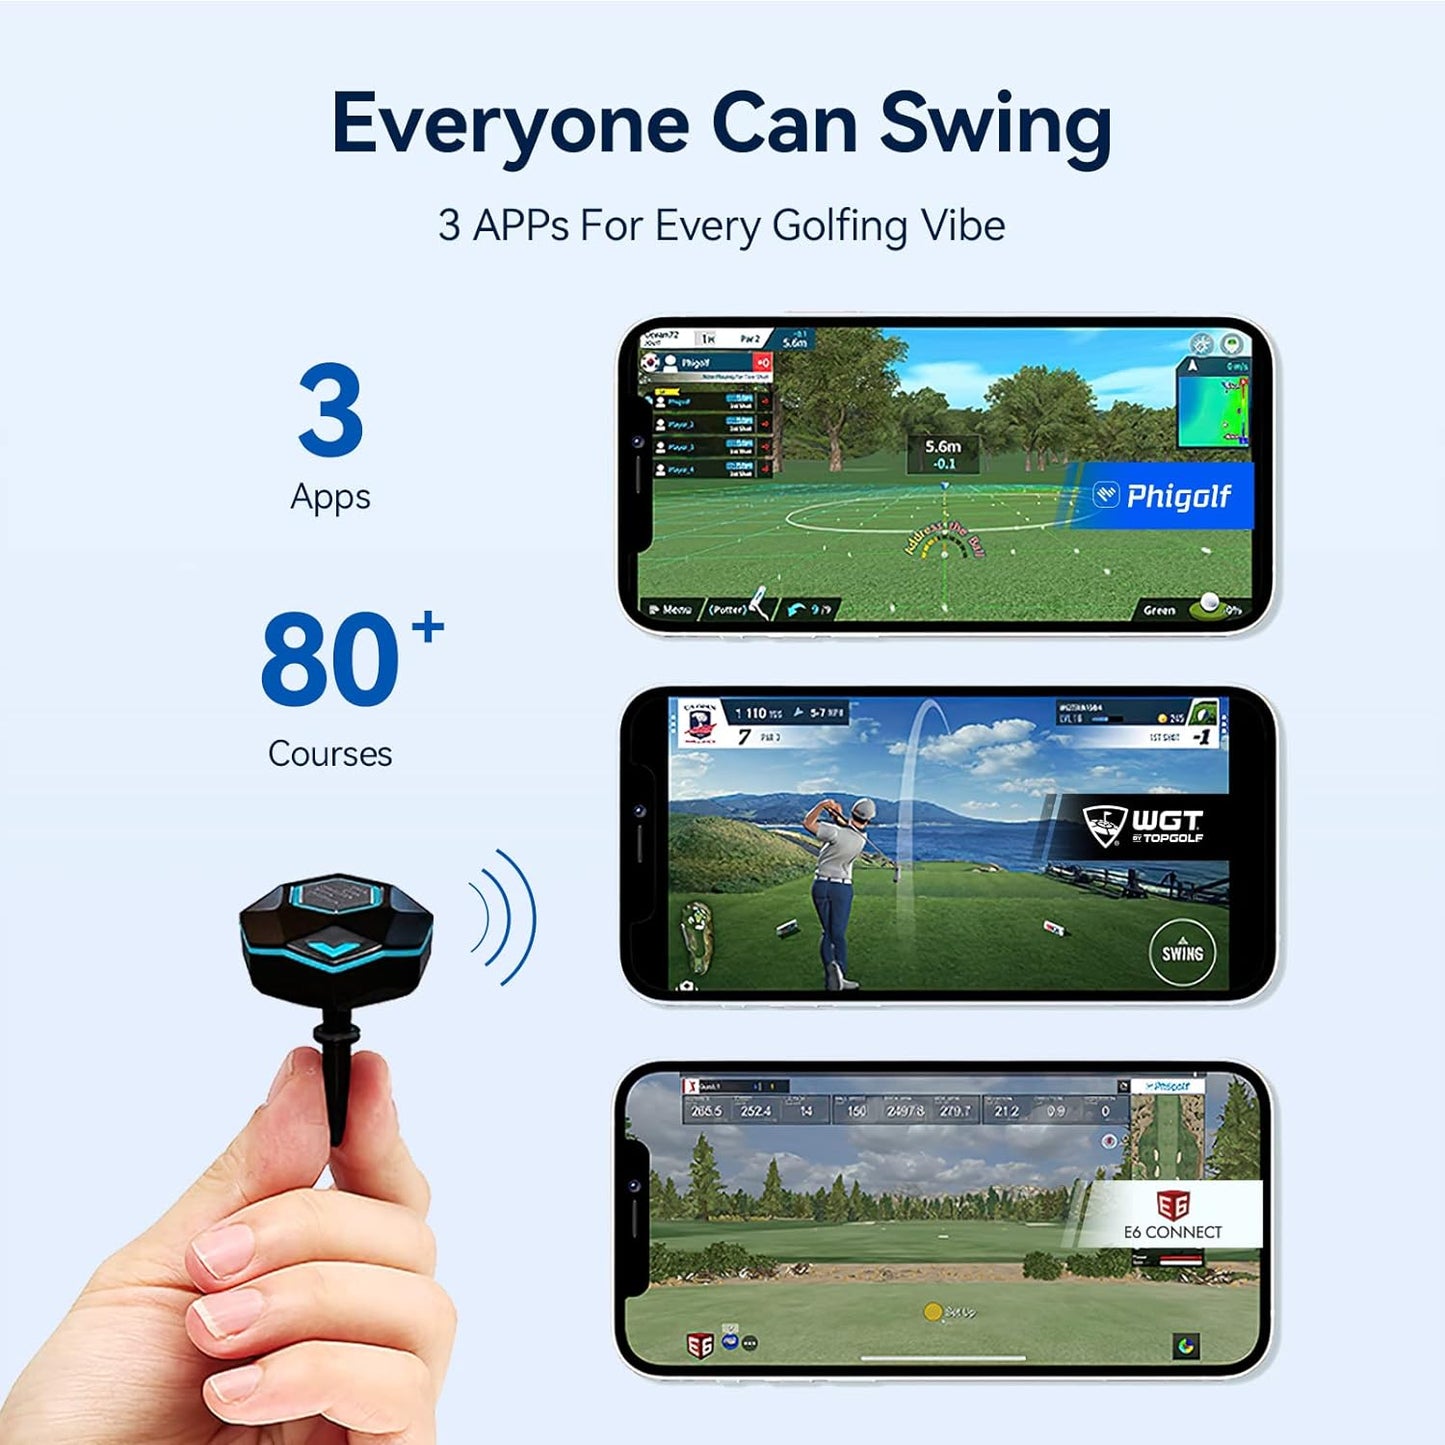 Home Golf Simulator, Enjoy Interactive Golfing with Smart Motion Sensor and Swing Stick for Indoor and Outdoor Fun - Compatible with Android, Ios, WGT, and E6 Connect Series